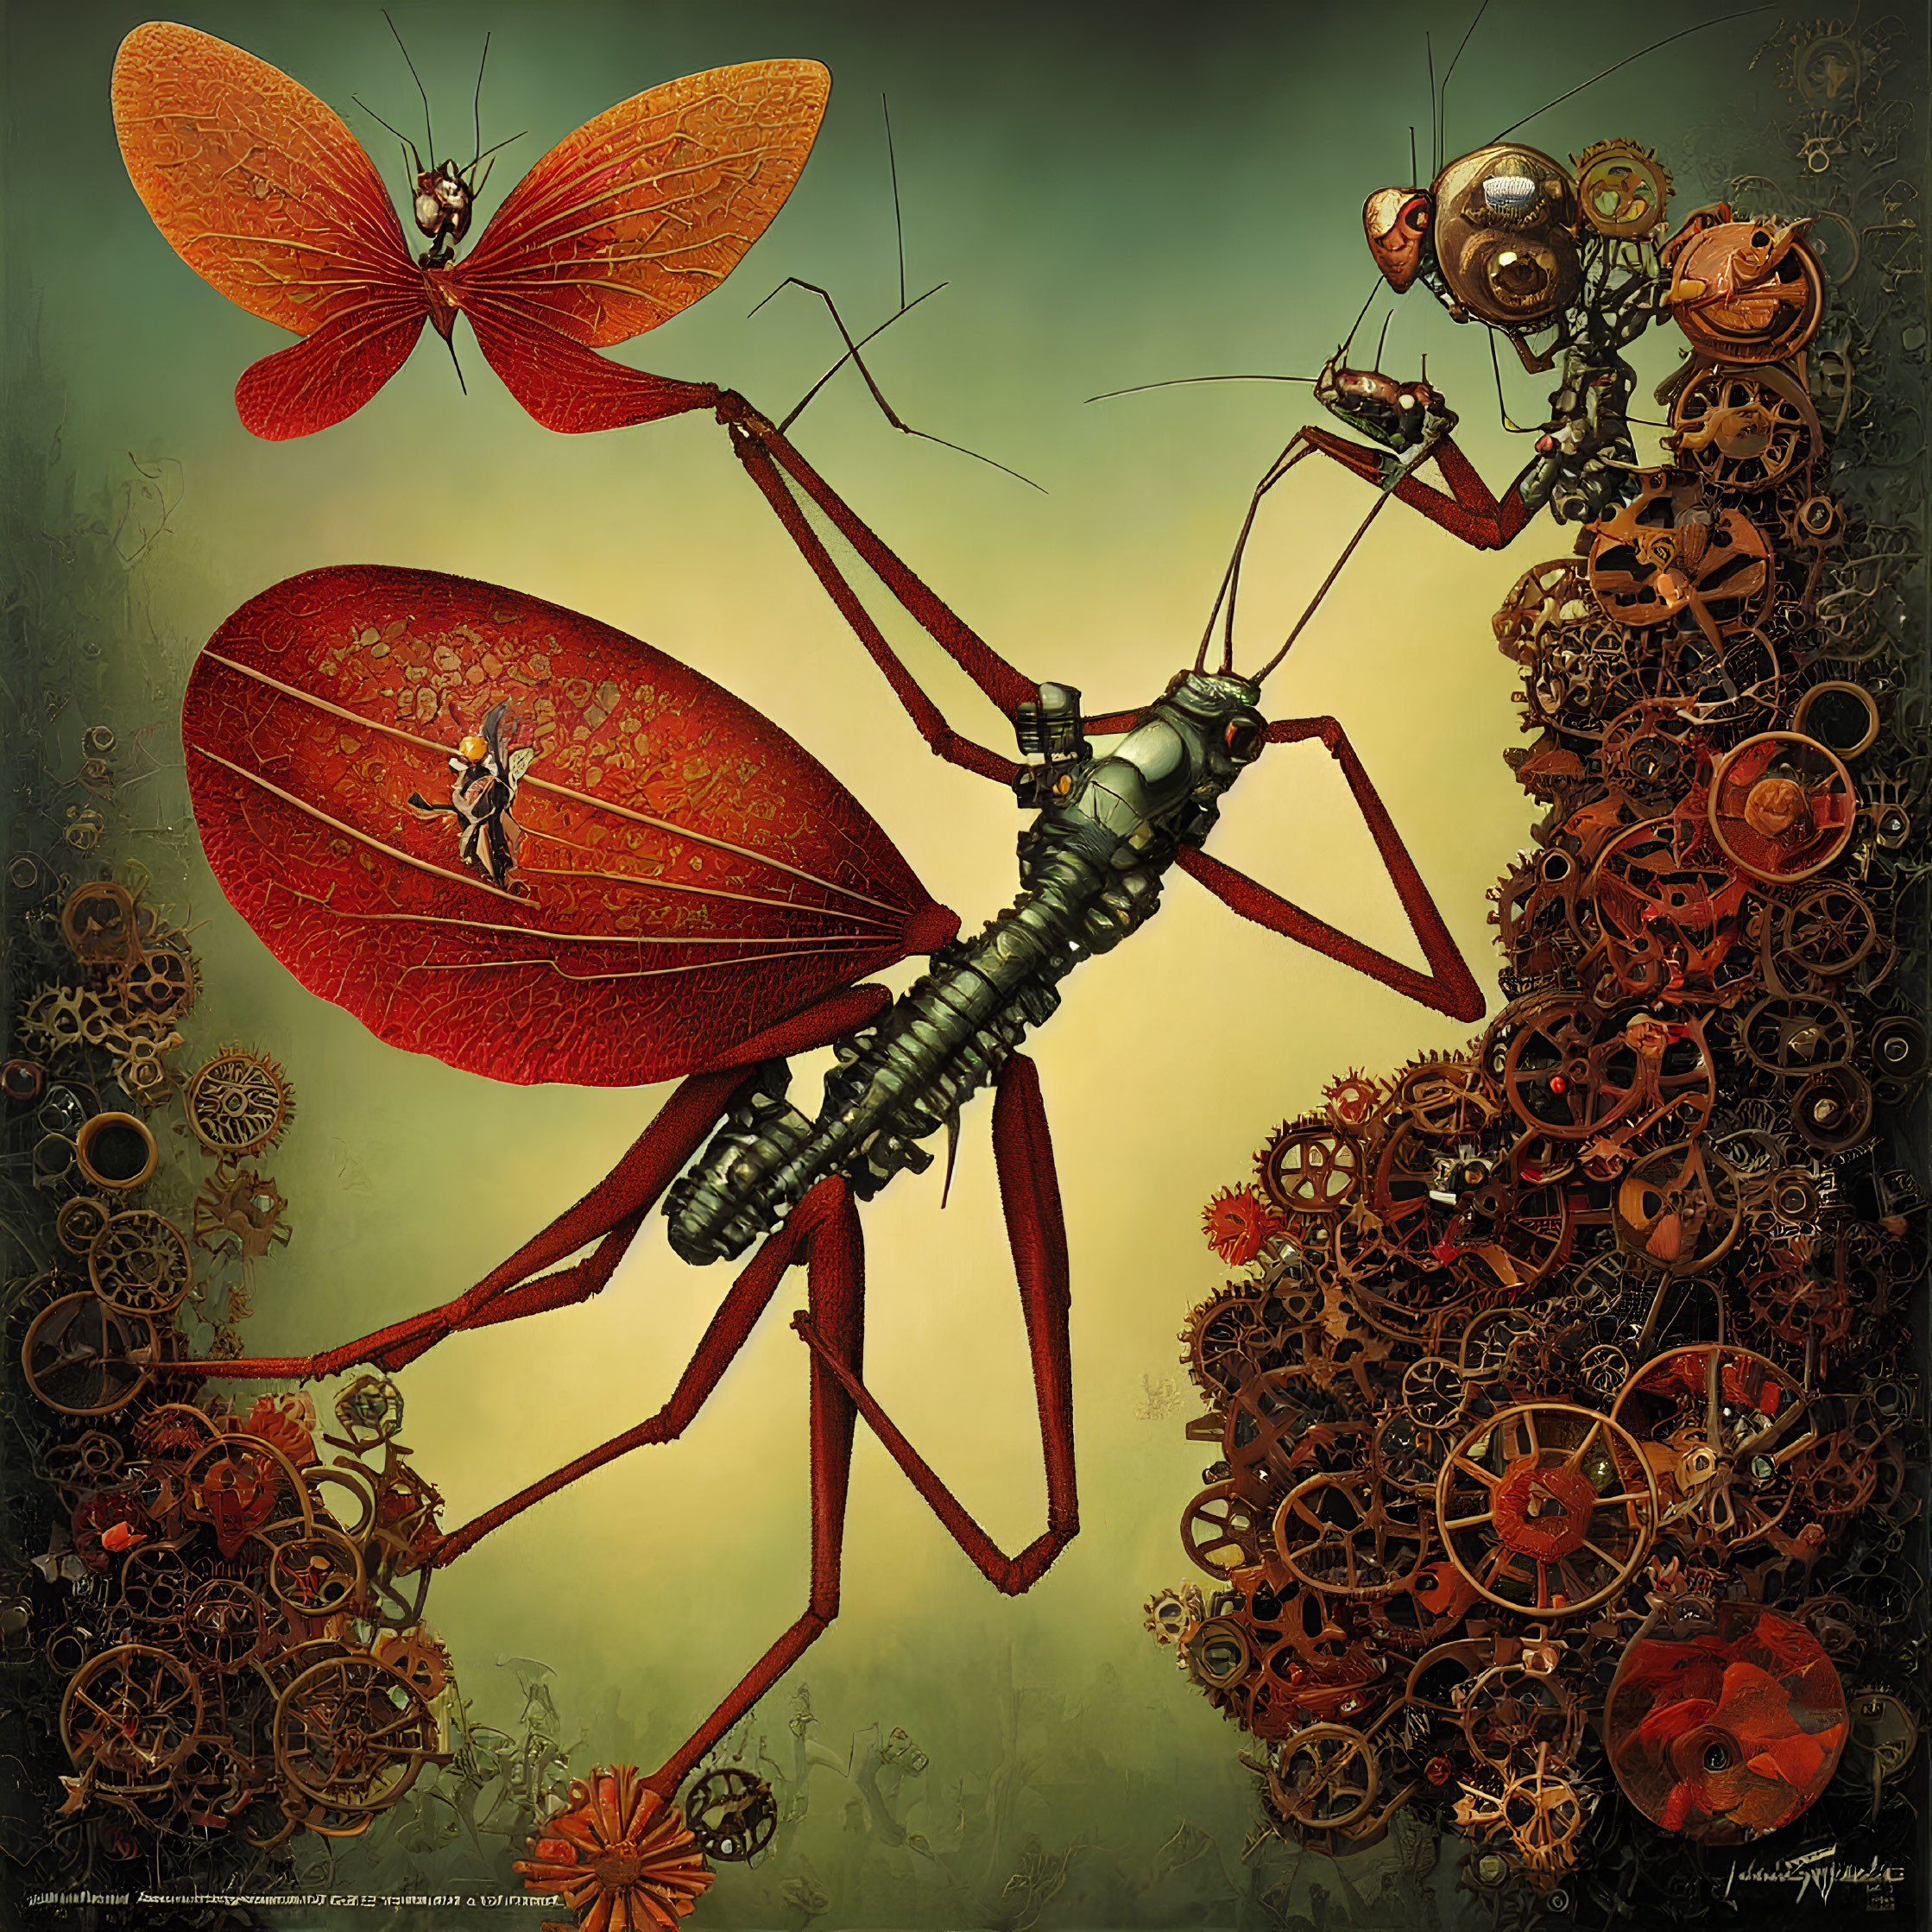 Steampunk-style digital artwork with mechanical ant and butterfly in intricate gear designs